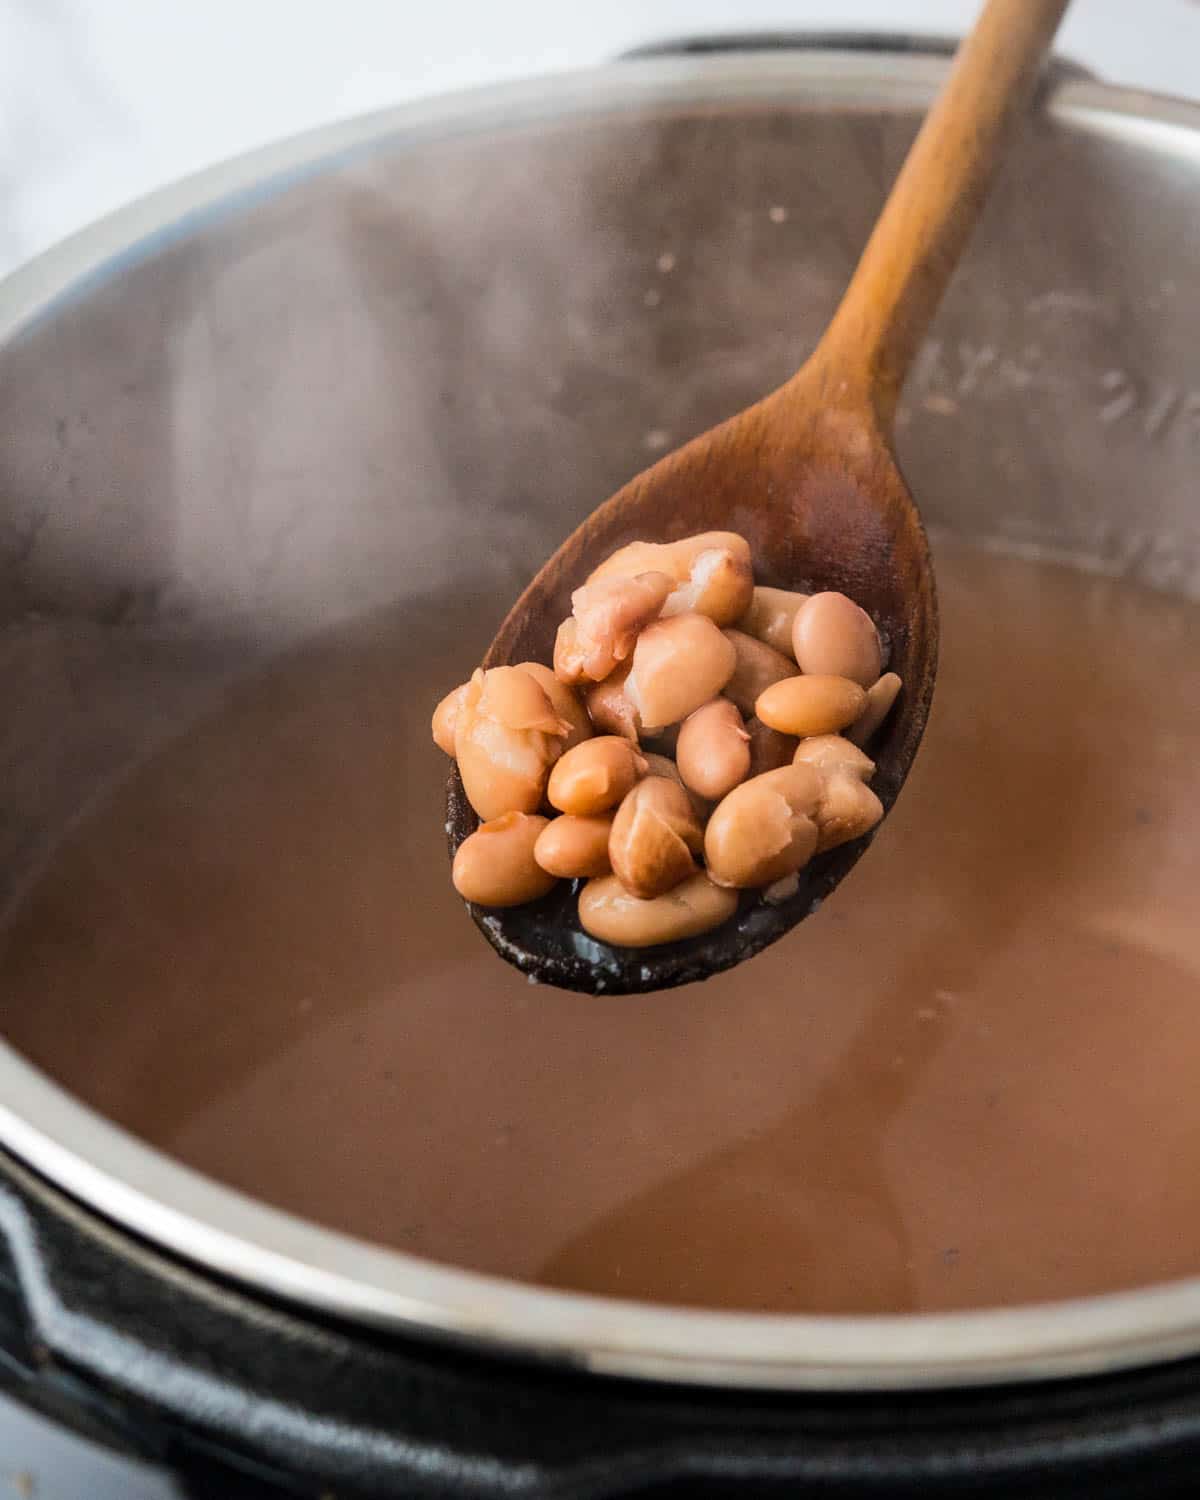 Par cook the pinto beans in a pressure cooker until tender.